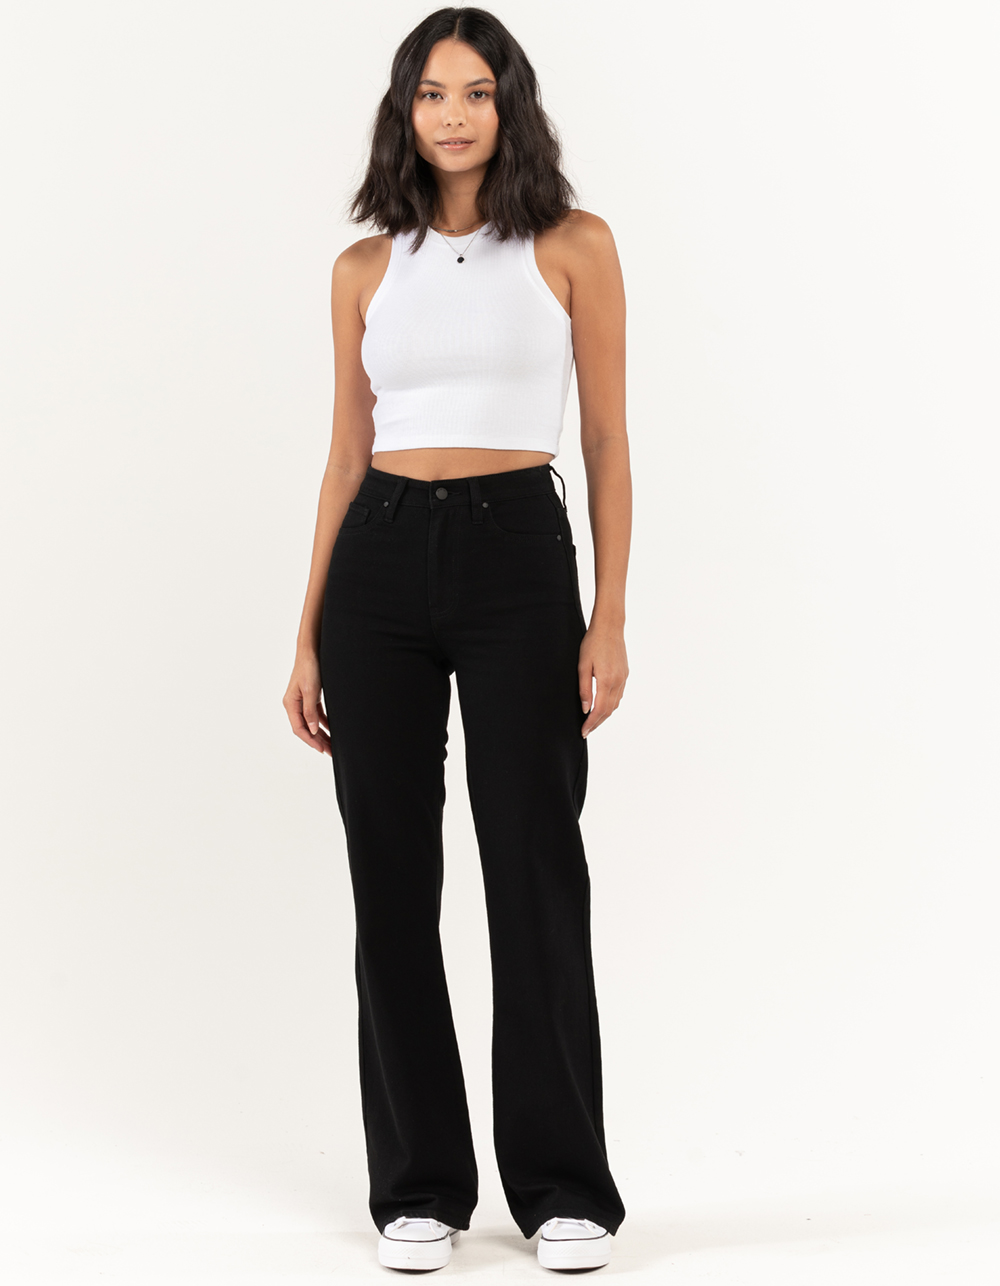 Destination Ready High Waisted Flare Pants, Black – Reesey B's